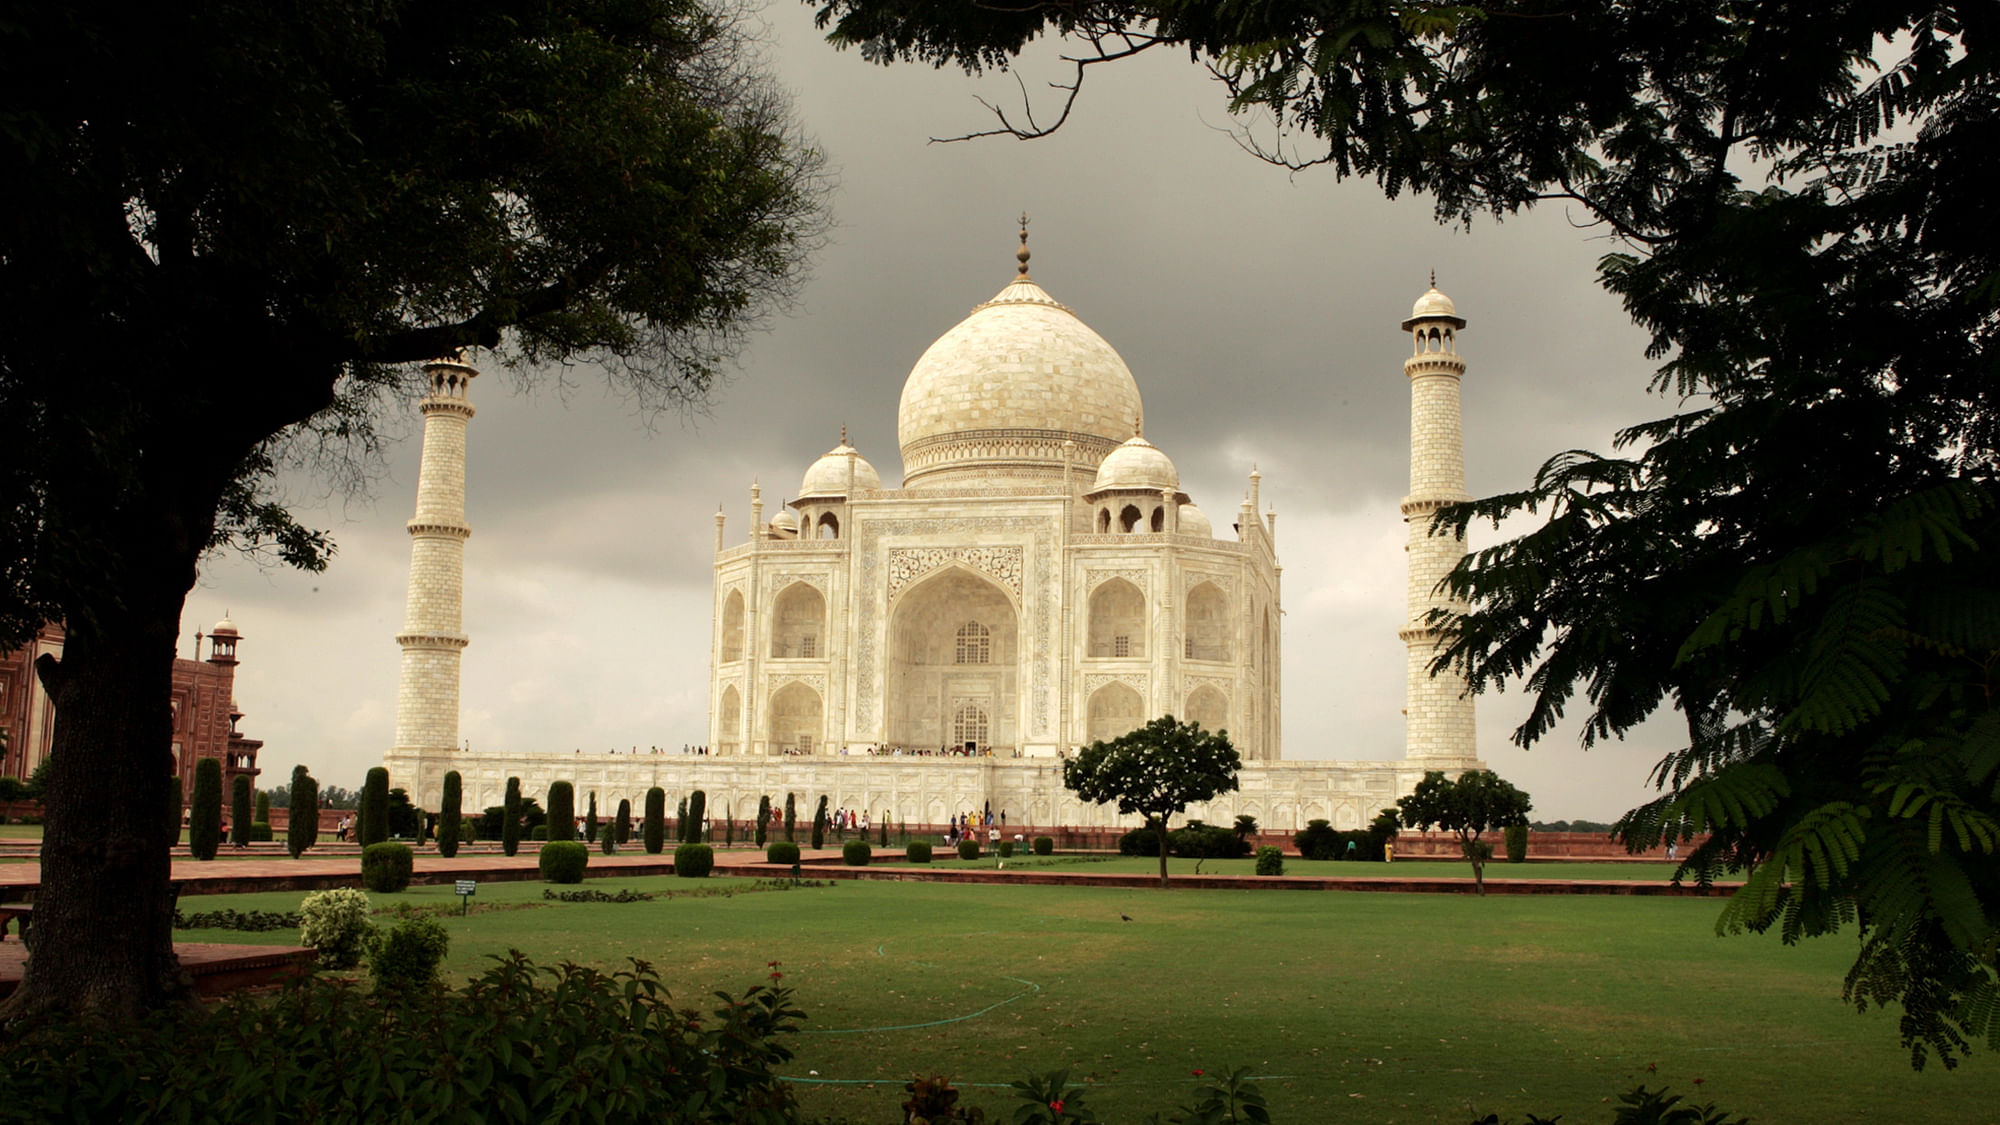 The Taj Mahal is not a temple, but a tomb, says the Archaelogical Survey of India.